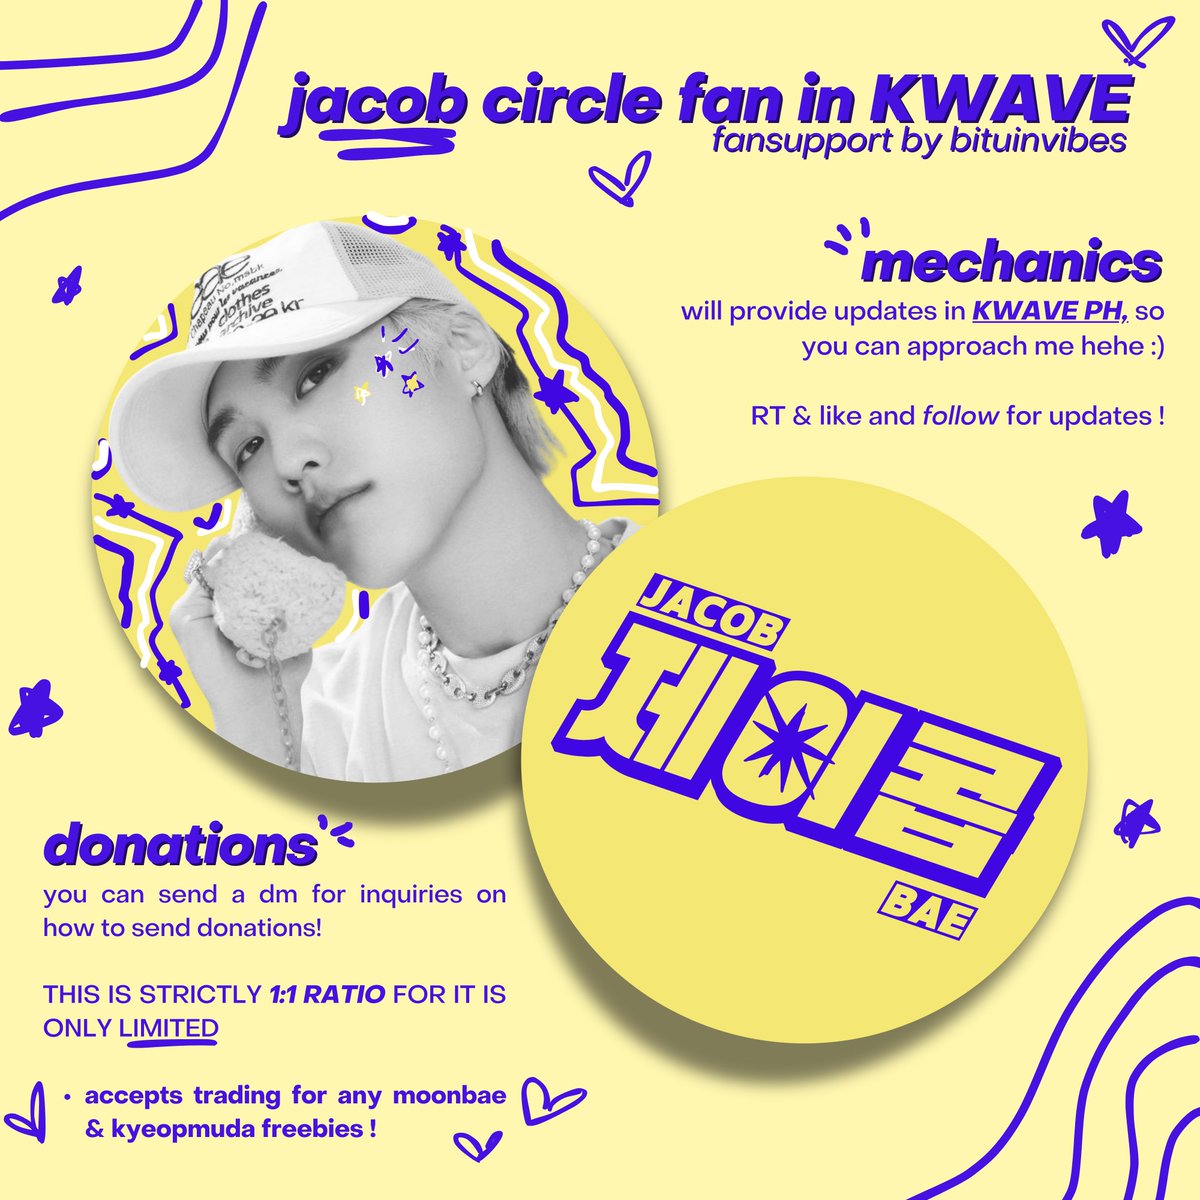 jacob circle fan in KWAVE #제이콥 ! 
── 𖹭 fan support for #THEBOYZ jacob at KWAVE by bituinvibes.

read the mechanics below! please rt, like. follow to be updated. ପ(๑•ᴗ•๑)ଓ 💛

open for donations! 
𖤐⭒๋࣭ ⭑ .ᐟ ᡣ𐭩 #KWaveMusicFestival #KWAVEPH